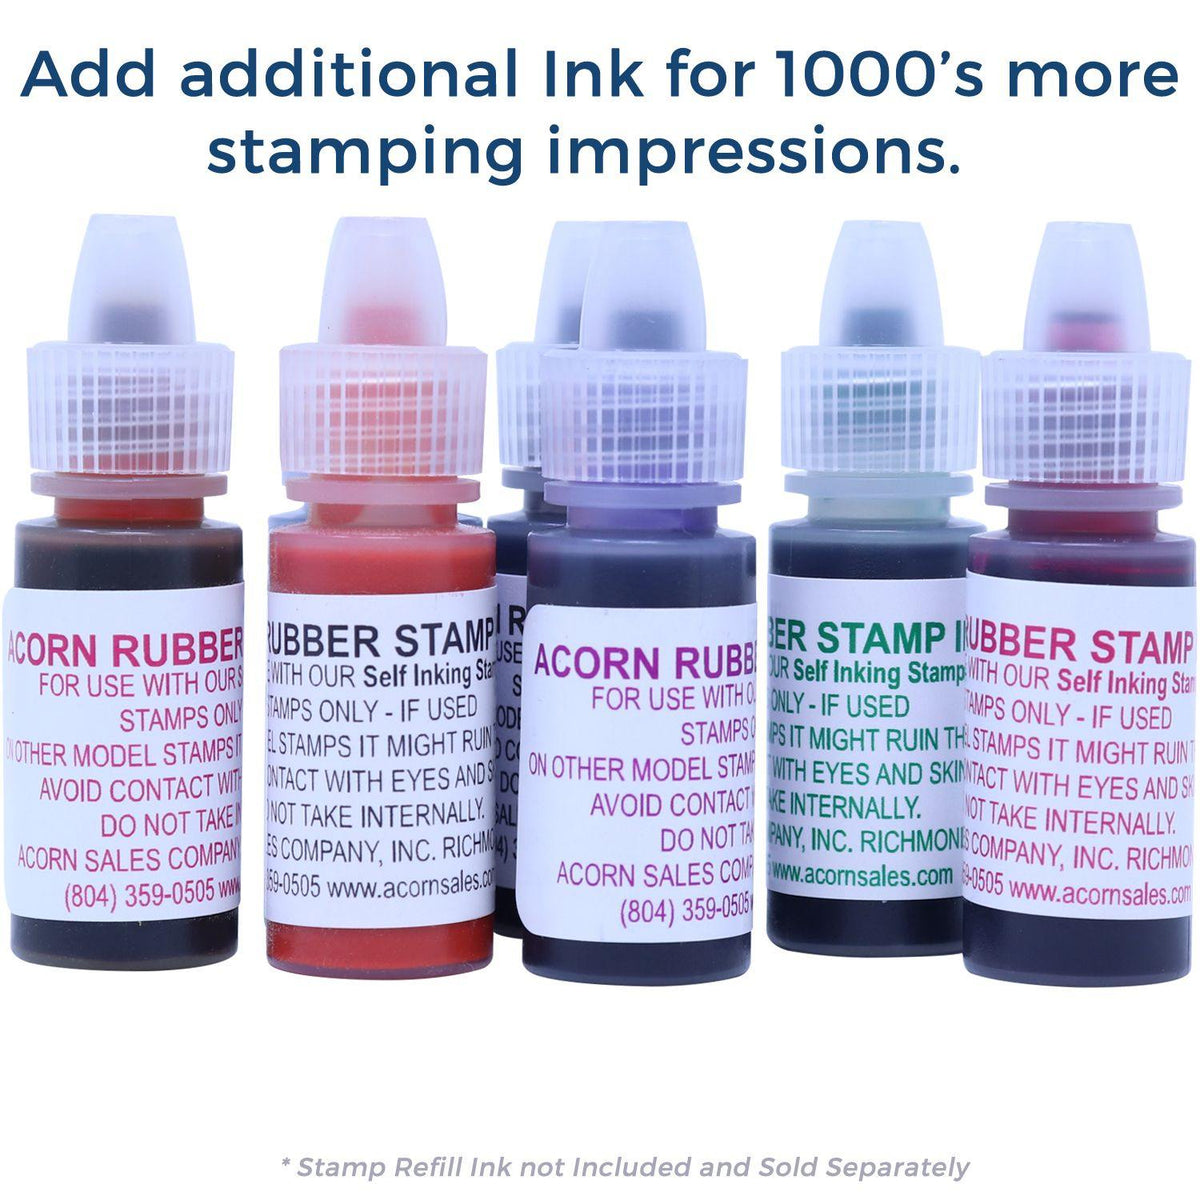 Refill Inks for Large Pre-Inked Narrow Font Non-Smoker Stamp Available